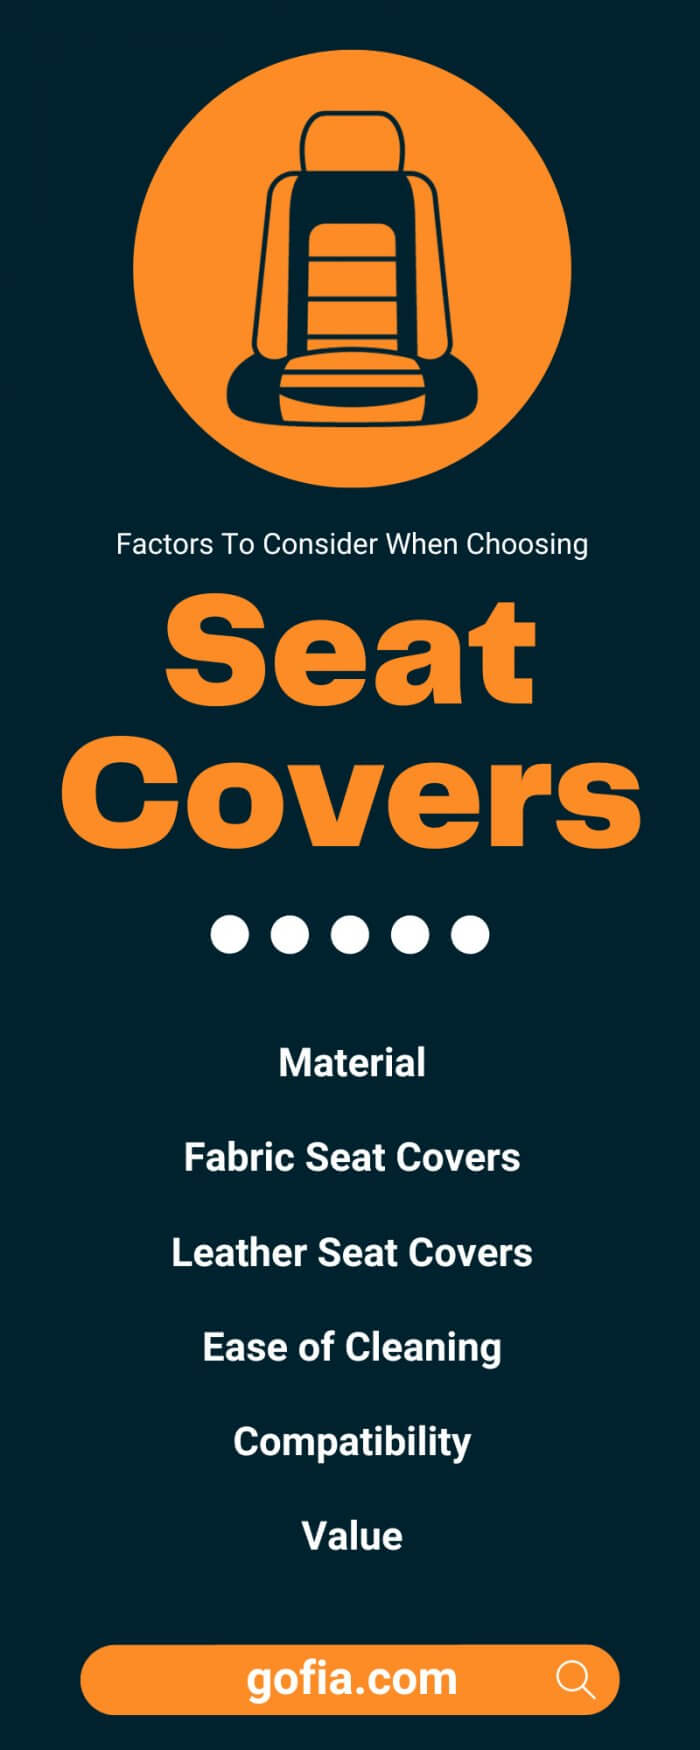 Factors To Consider When Choosing Seat Covers